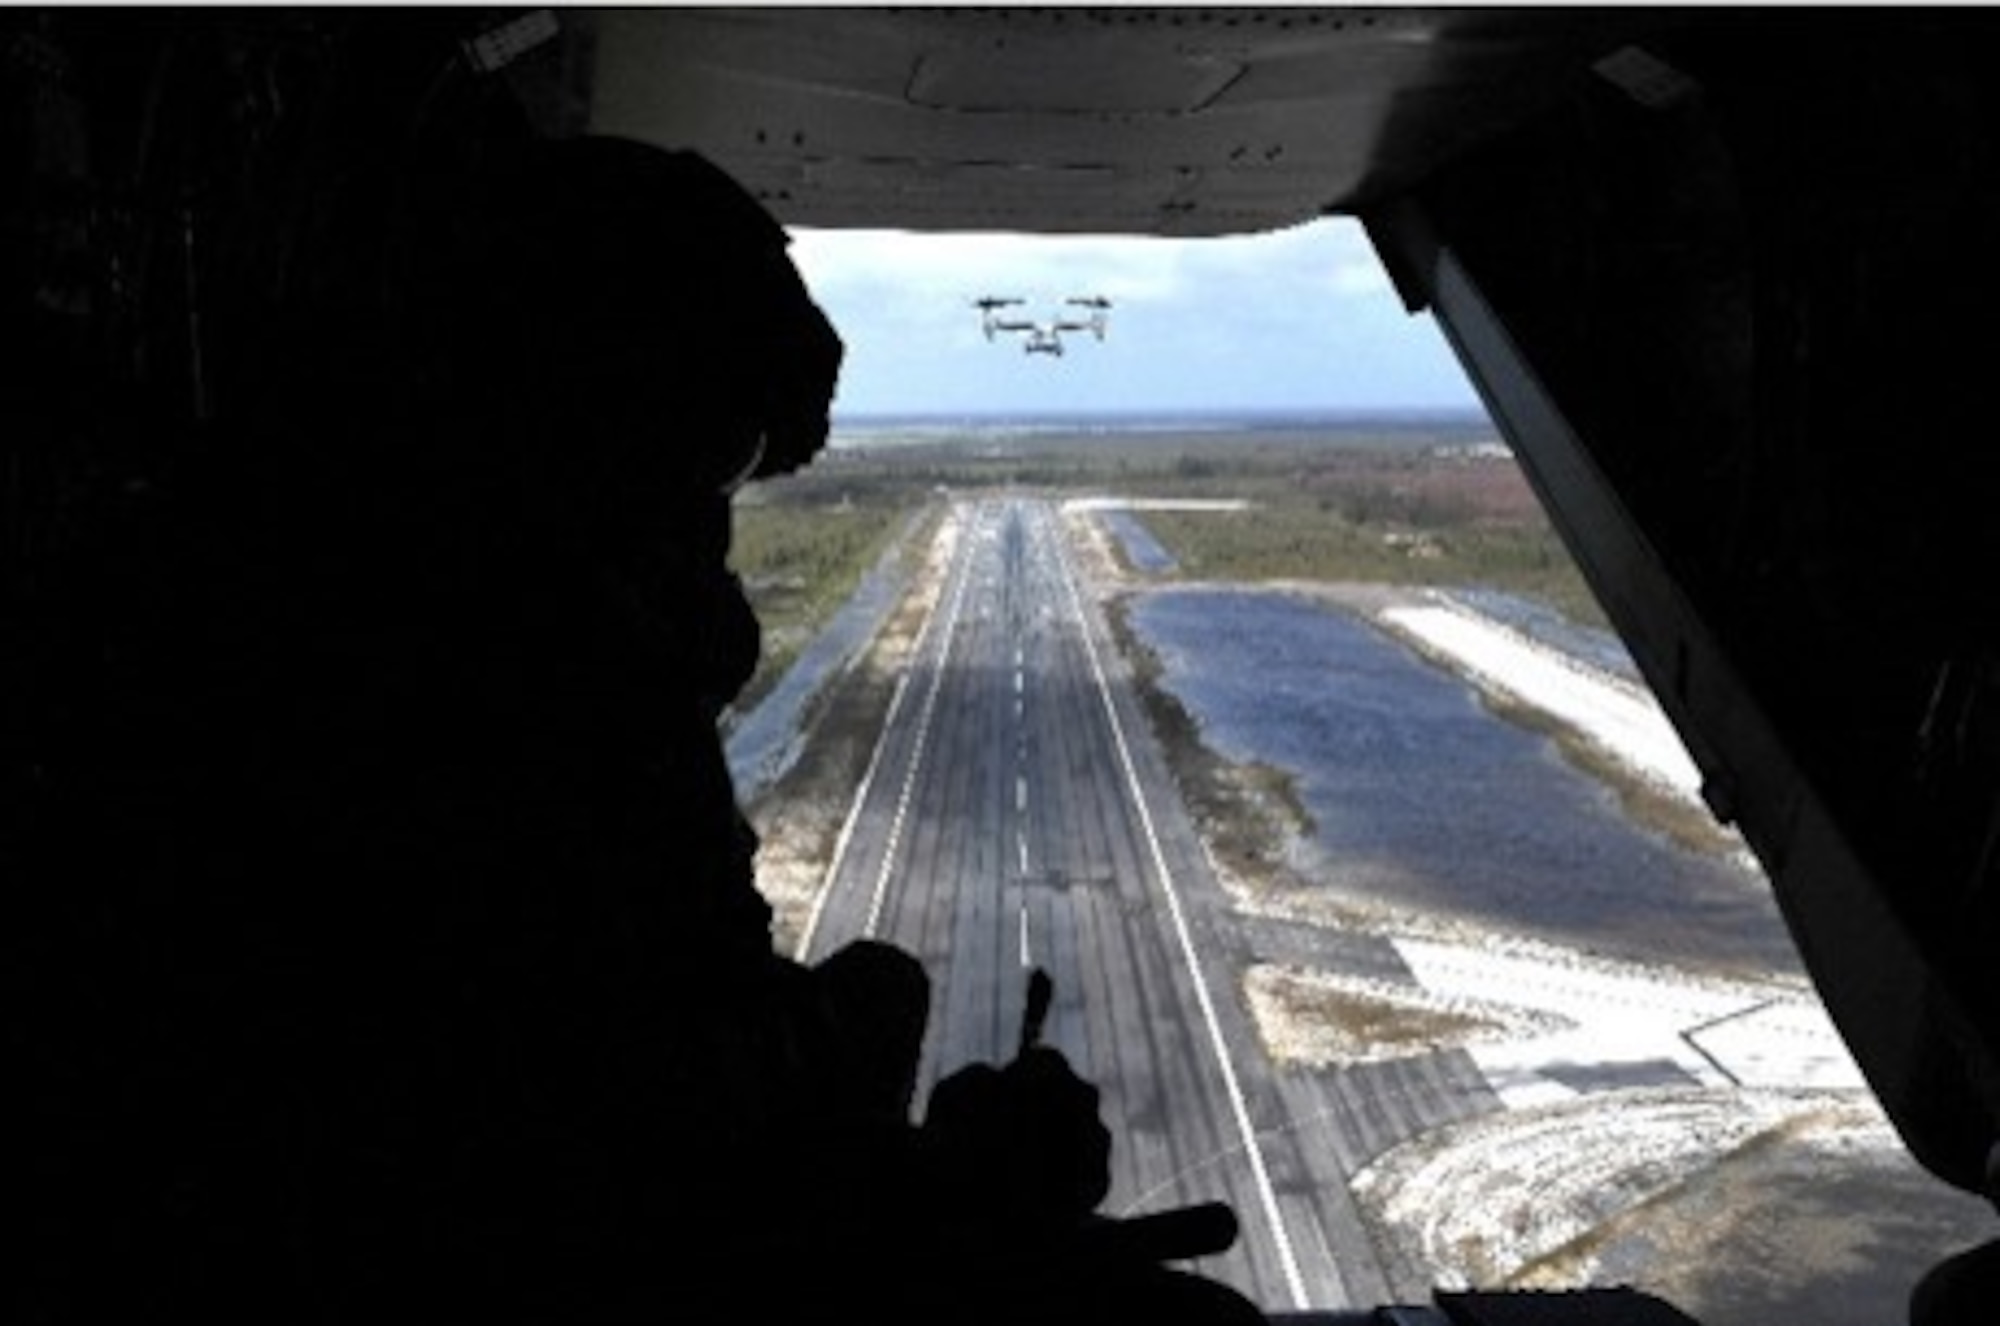 In support of Foreign Disaster Relief efforts in the Bahamas, a U.S. Air Force assessment team member conducts an aerial assessment of Grand Bahama airfield, Sept. 4, 2019. The team will evaluate airfields in The Bahamas to determine if they can safely reopen to receive aircraft providing humanitarian assistance. The Secretary of Defense authorized U.S. Northern Command to provide transportation logistics for the movement of USAID and third party humanitarian commodities and personnel throughout the region and to conduct assessments of critical transportation nodes to facilitate the delivery of humanitarian assistance and maximize the flow of disaster relief into the area. (U.S. Air Force photo by Tech. Sgt. Liliana Moreno)